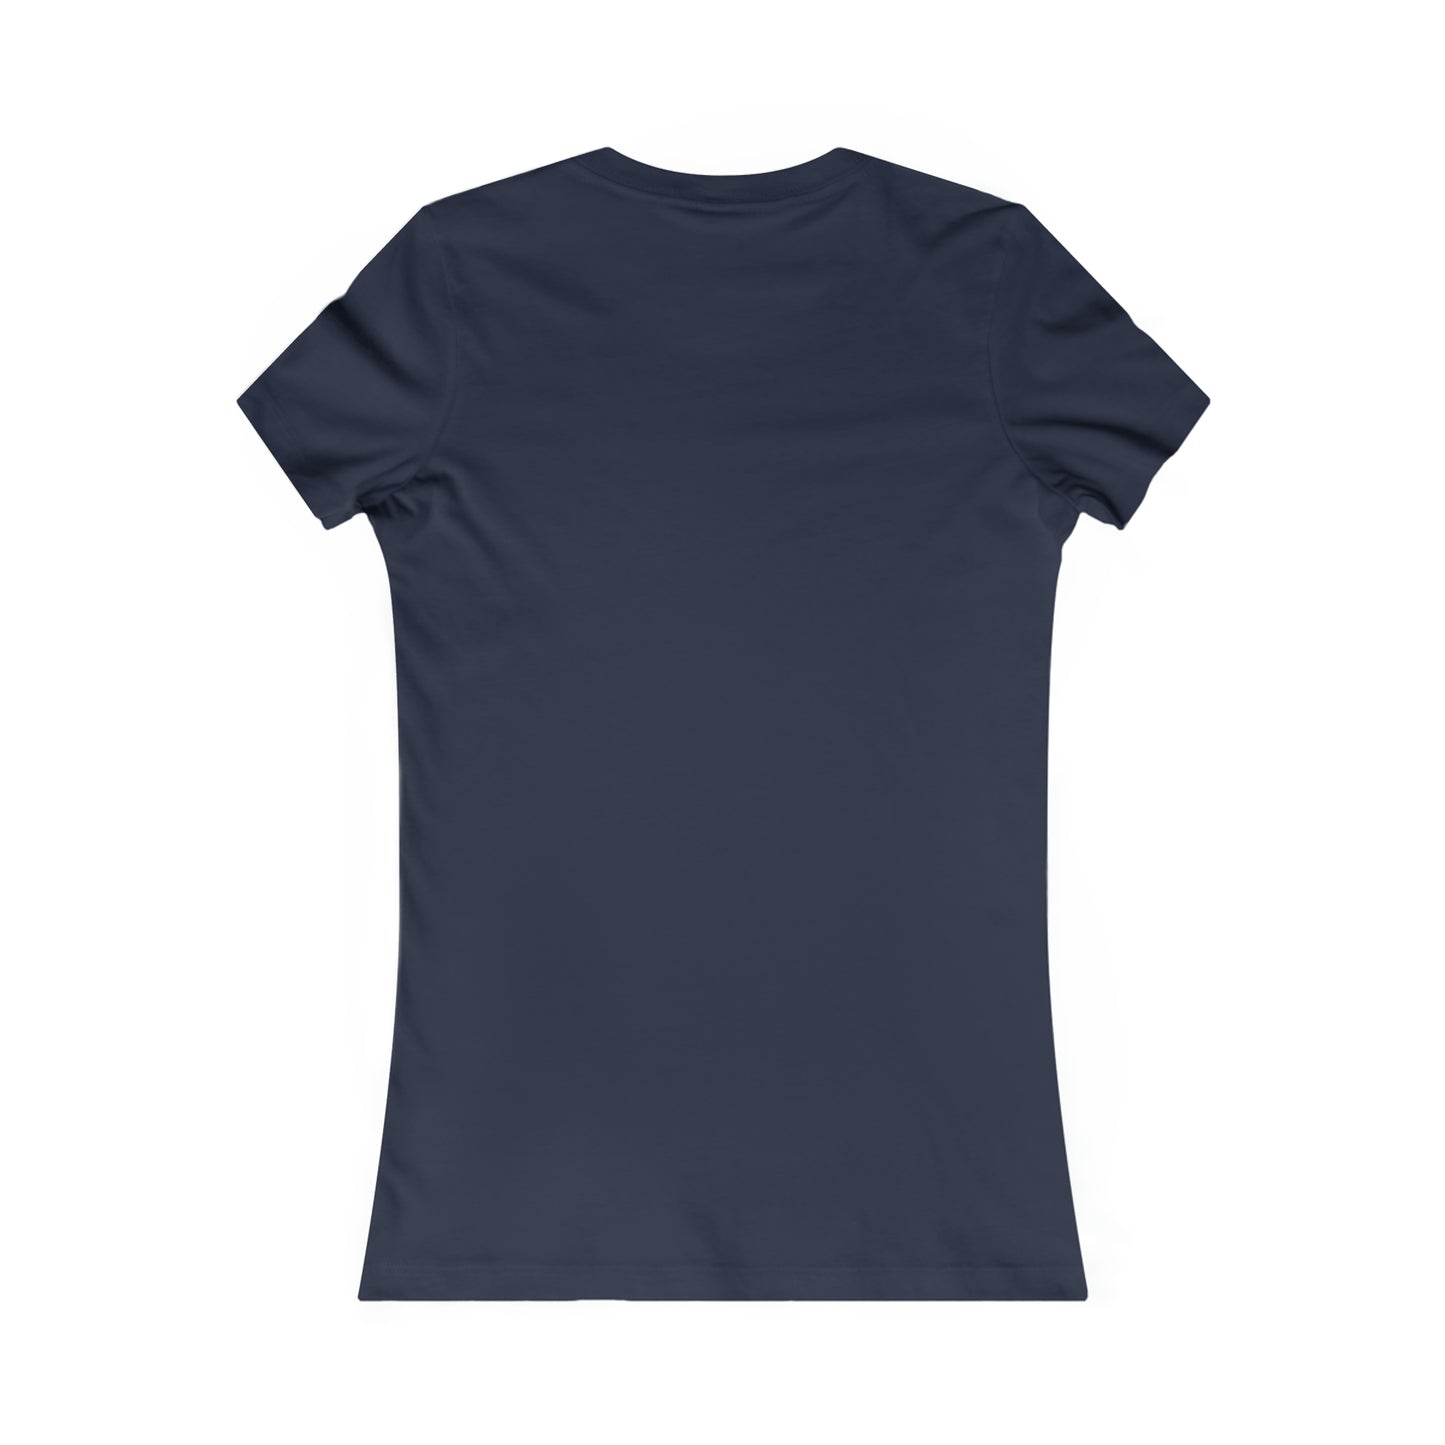 'Seize the clay' - Women's Favorite Tee